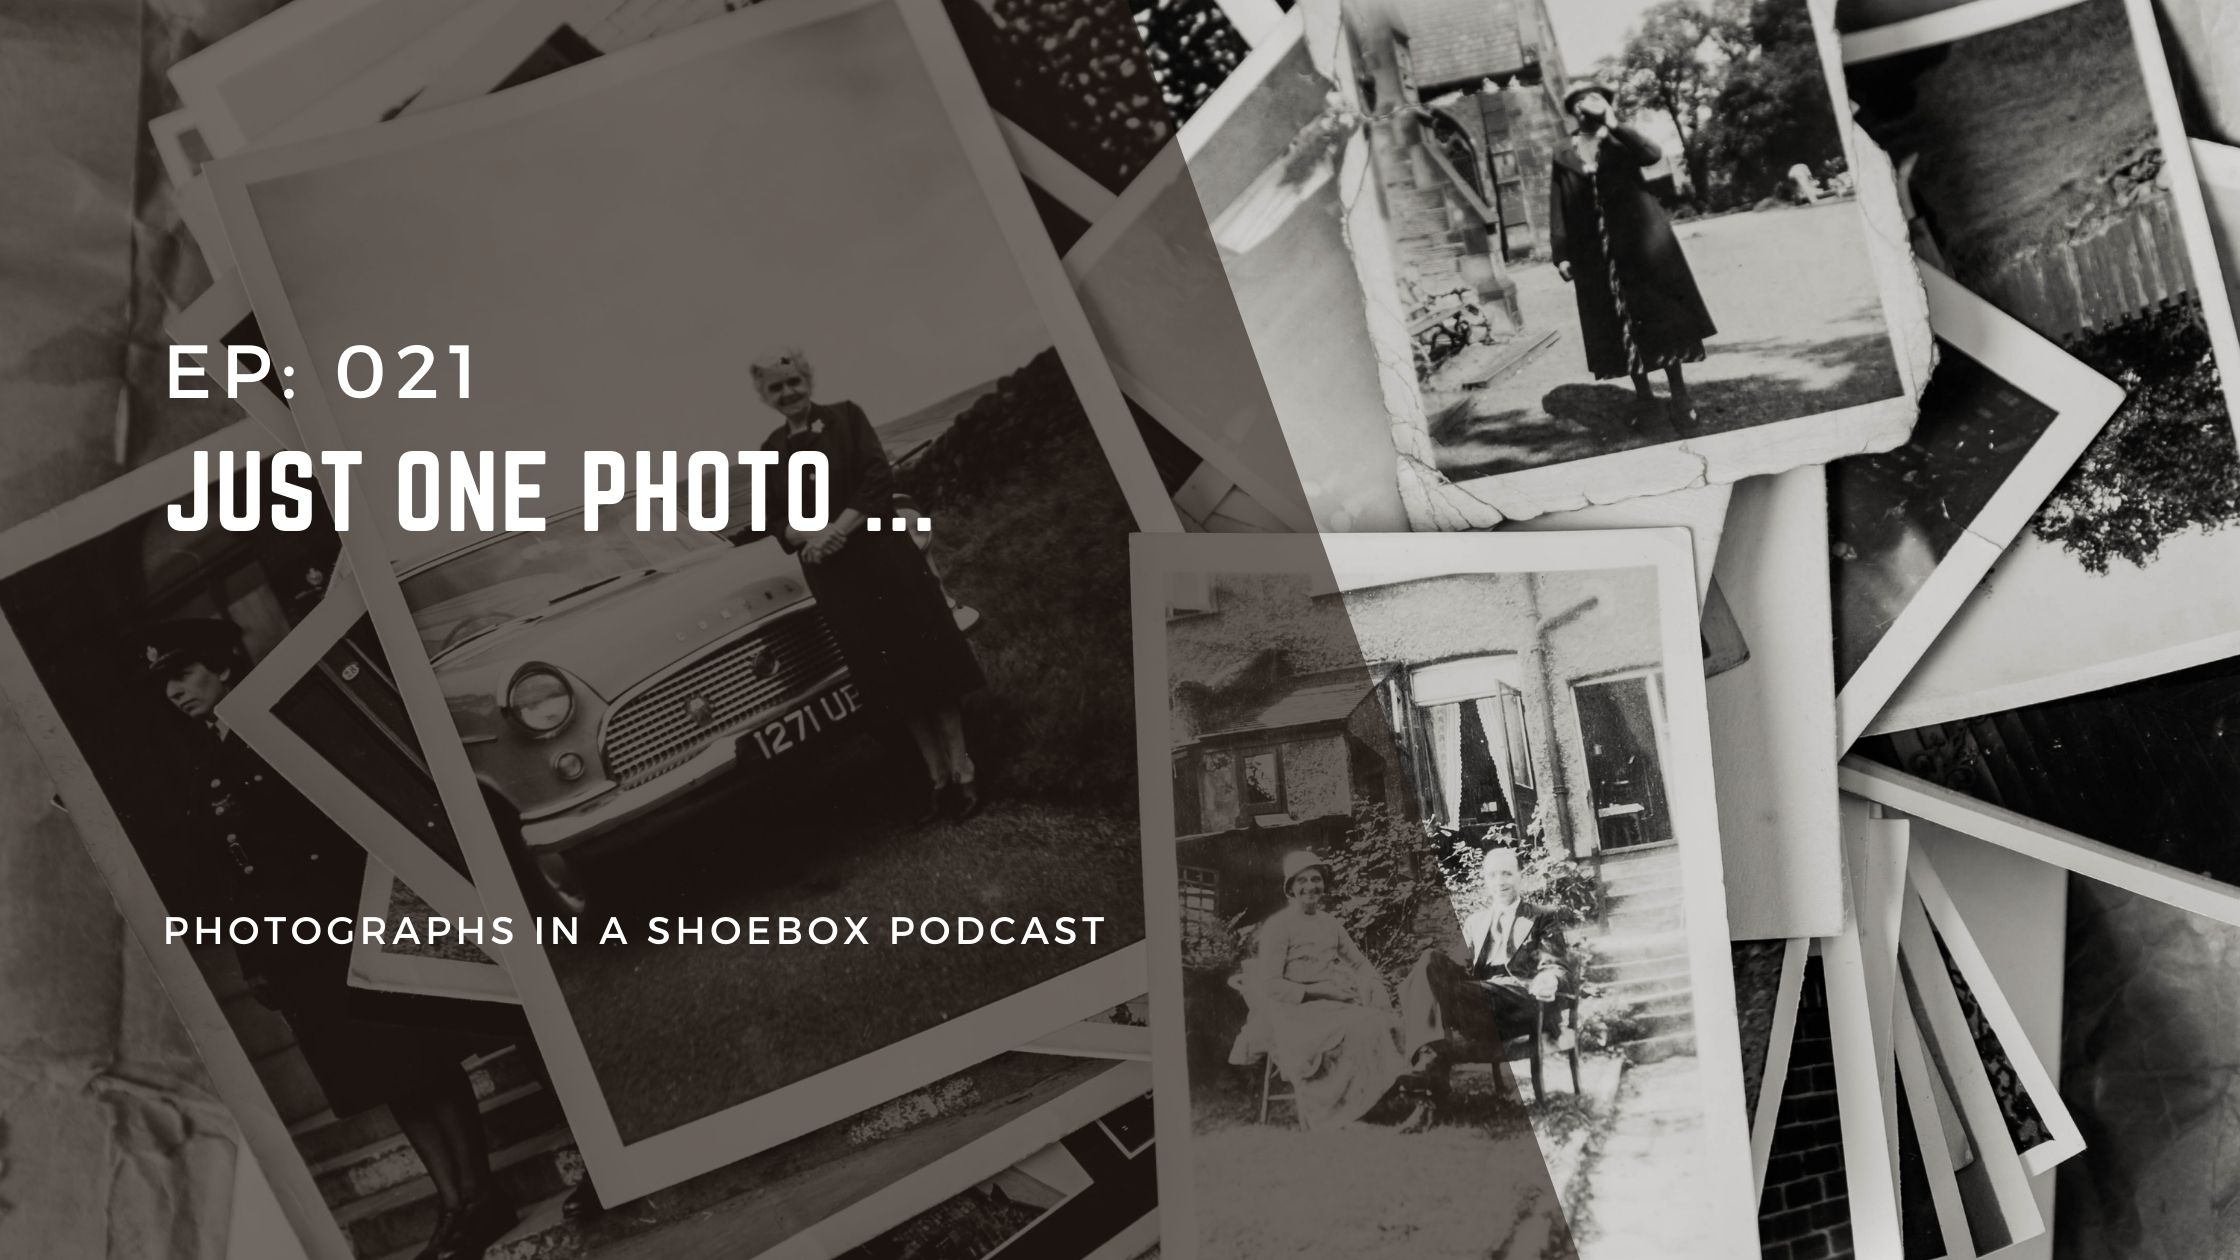 title artwork for podcast episode 'just one photo...'